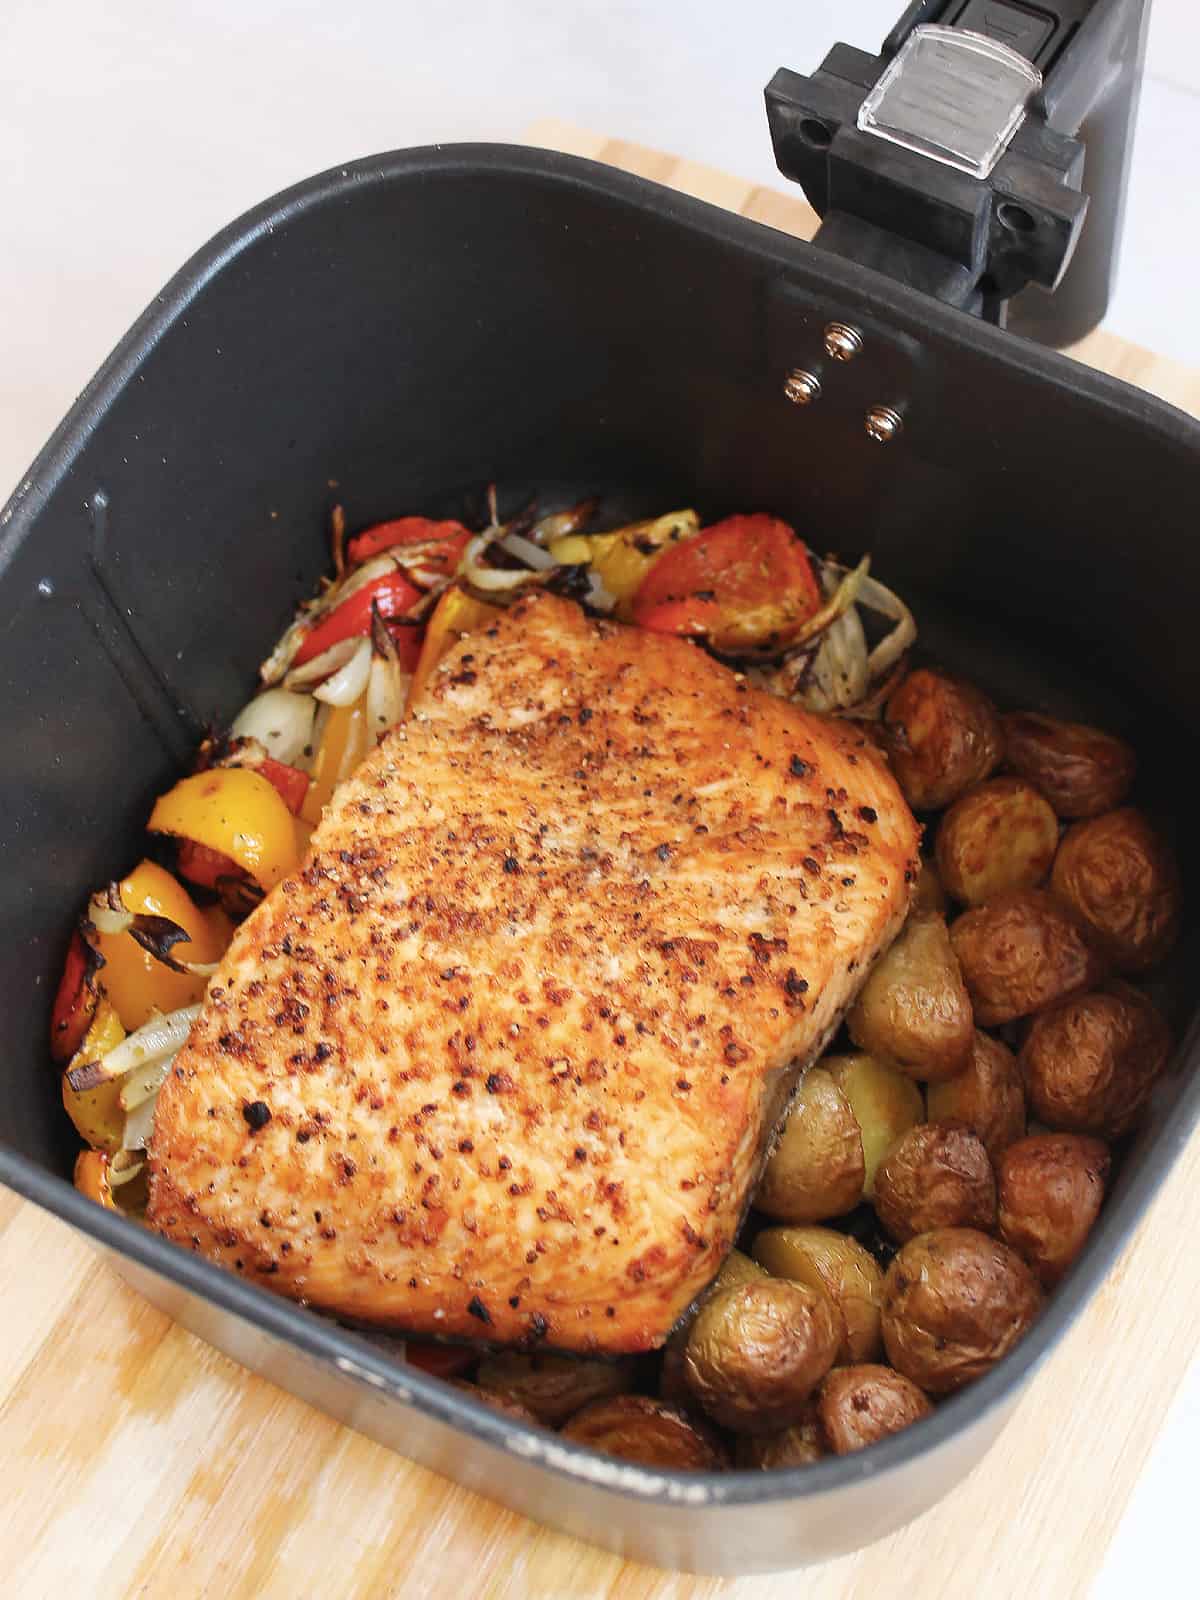 Salmon fillet, vegetables and potatoes in an air fryer basket ready to serve.